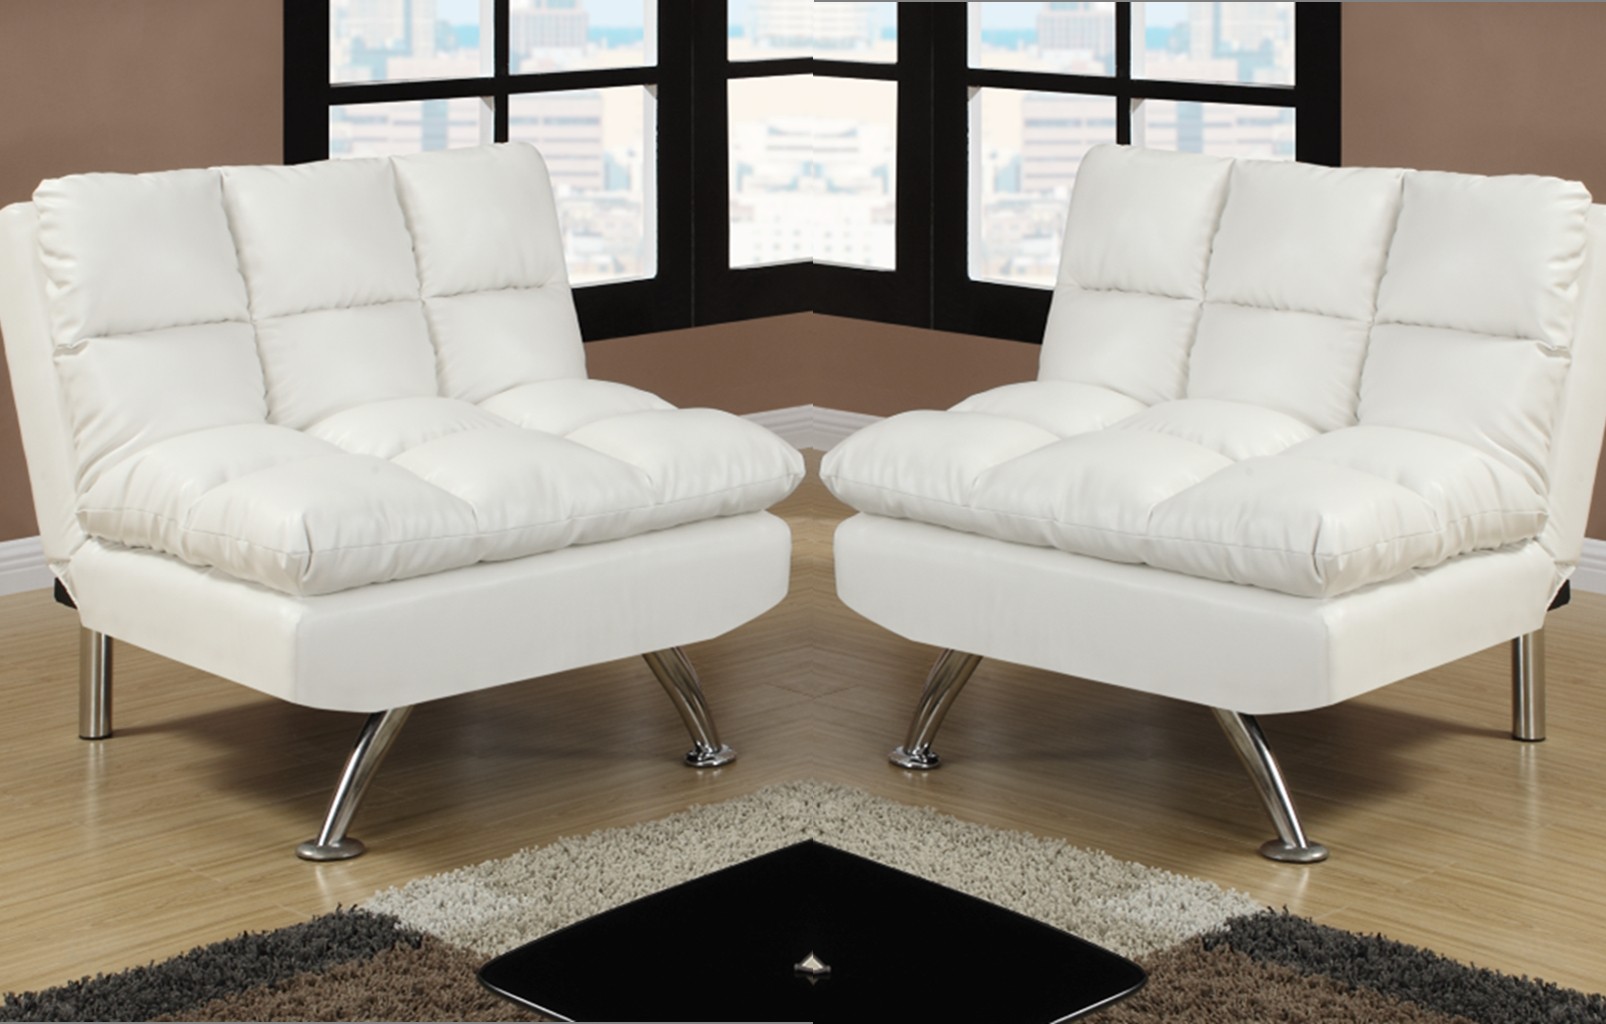 Chalbury white adjustable chair from chaise sofas perth